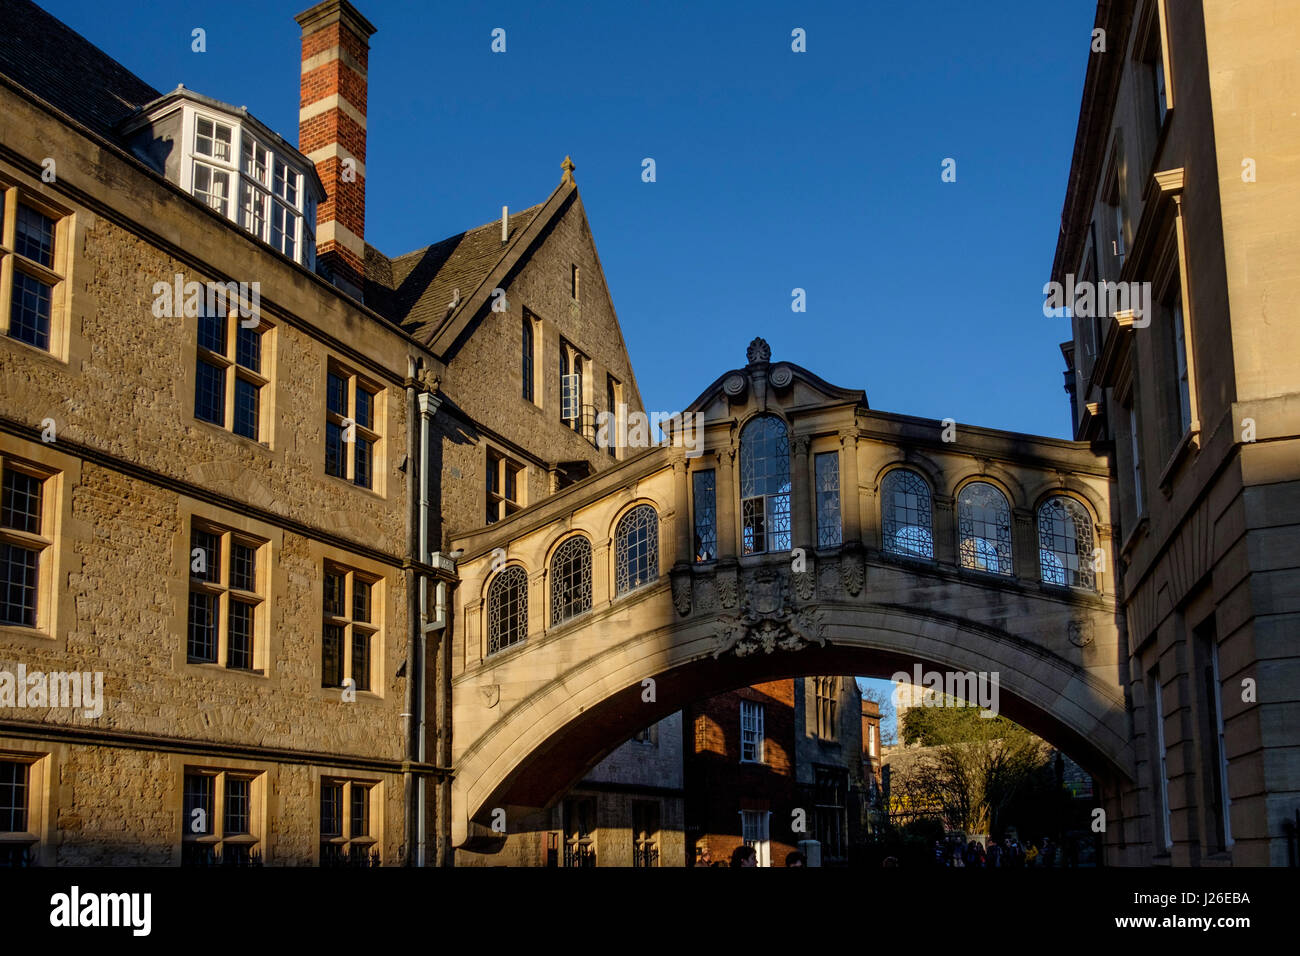 The Bridge of Sighs at Hertford College, Oxford, England, UK Stock Photo